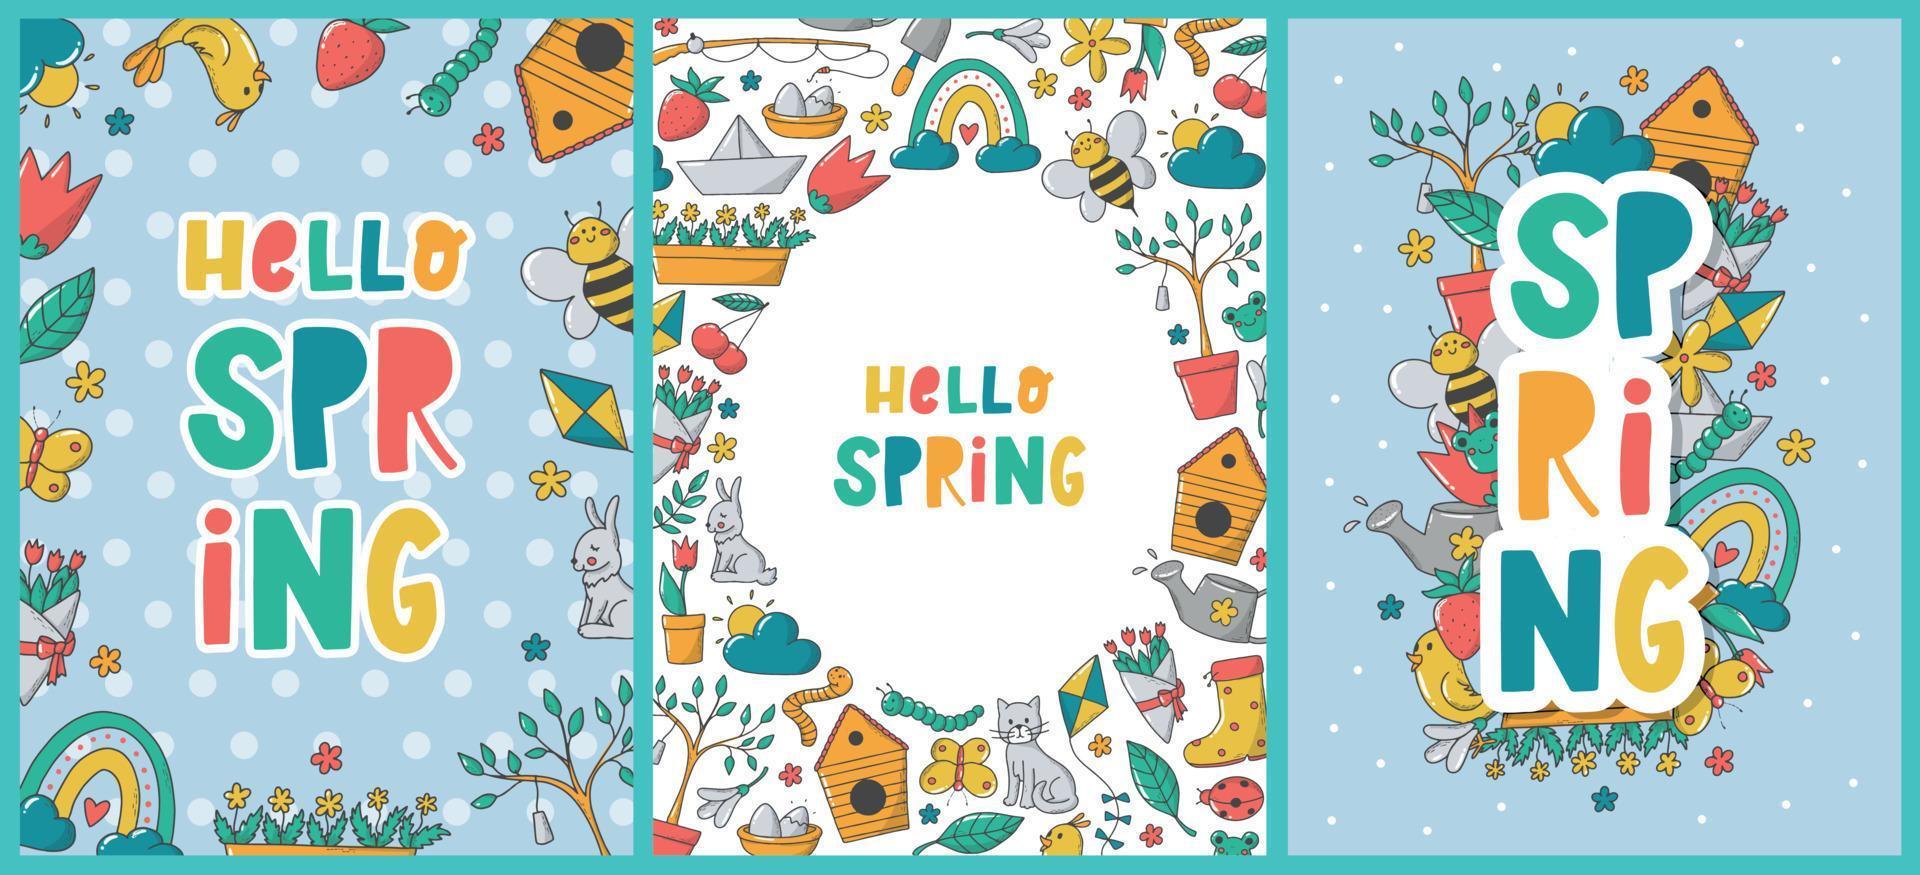 set of 3 Spring greeting cards, posters, prints decorated with lettering quotes and doodles. Good for easter templates, invitations, banners, etc. EPS 10 vector